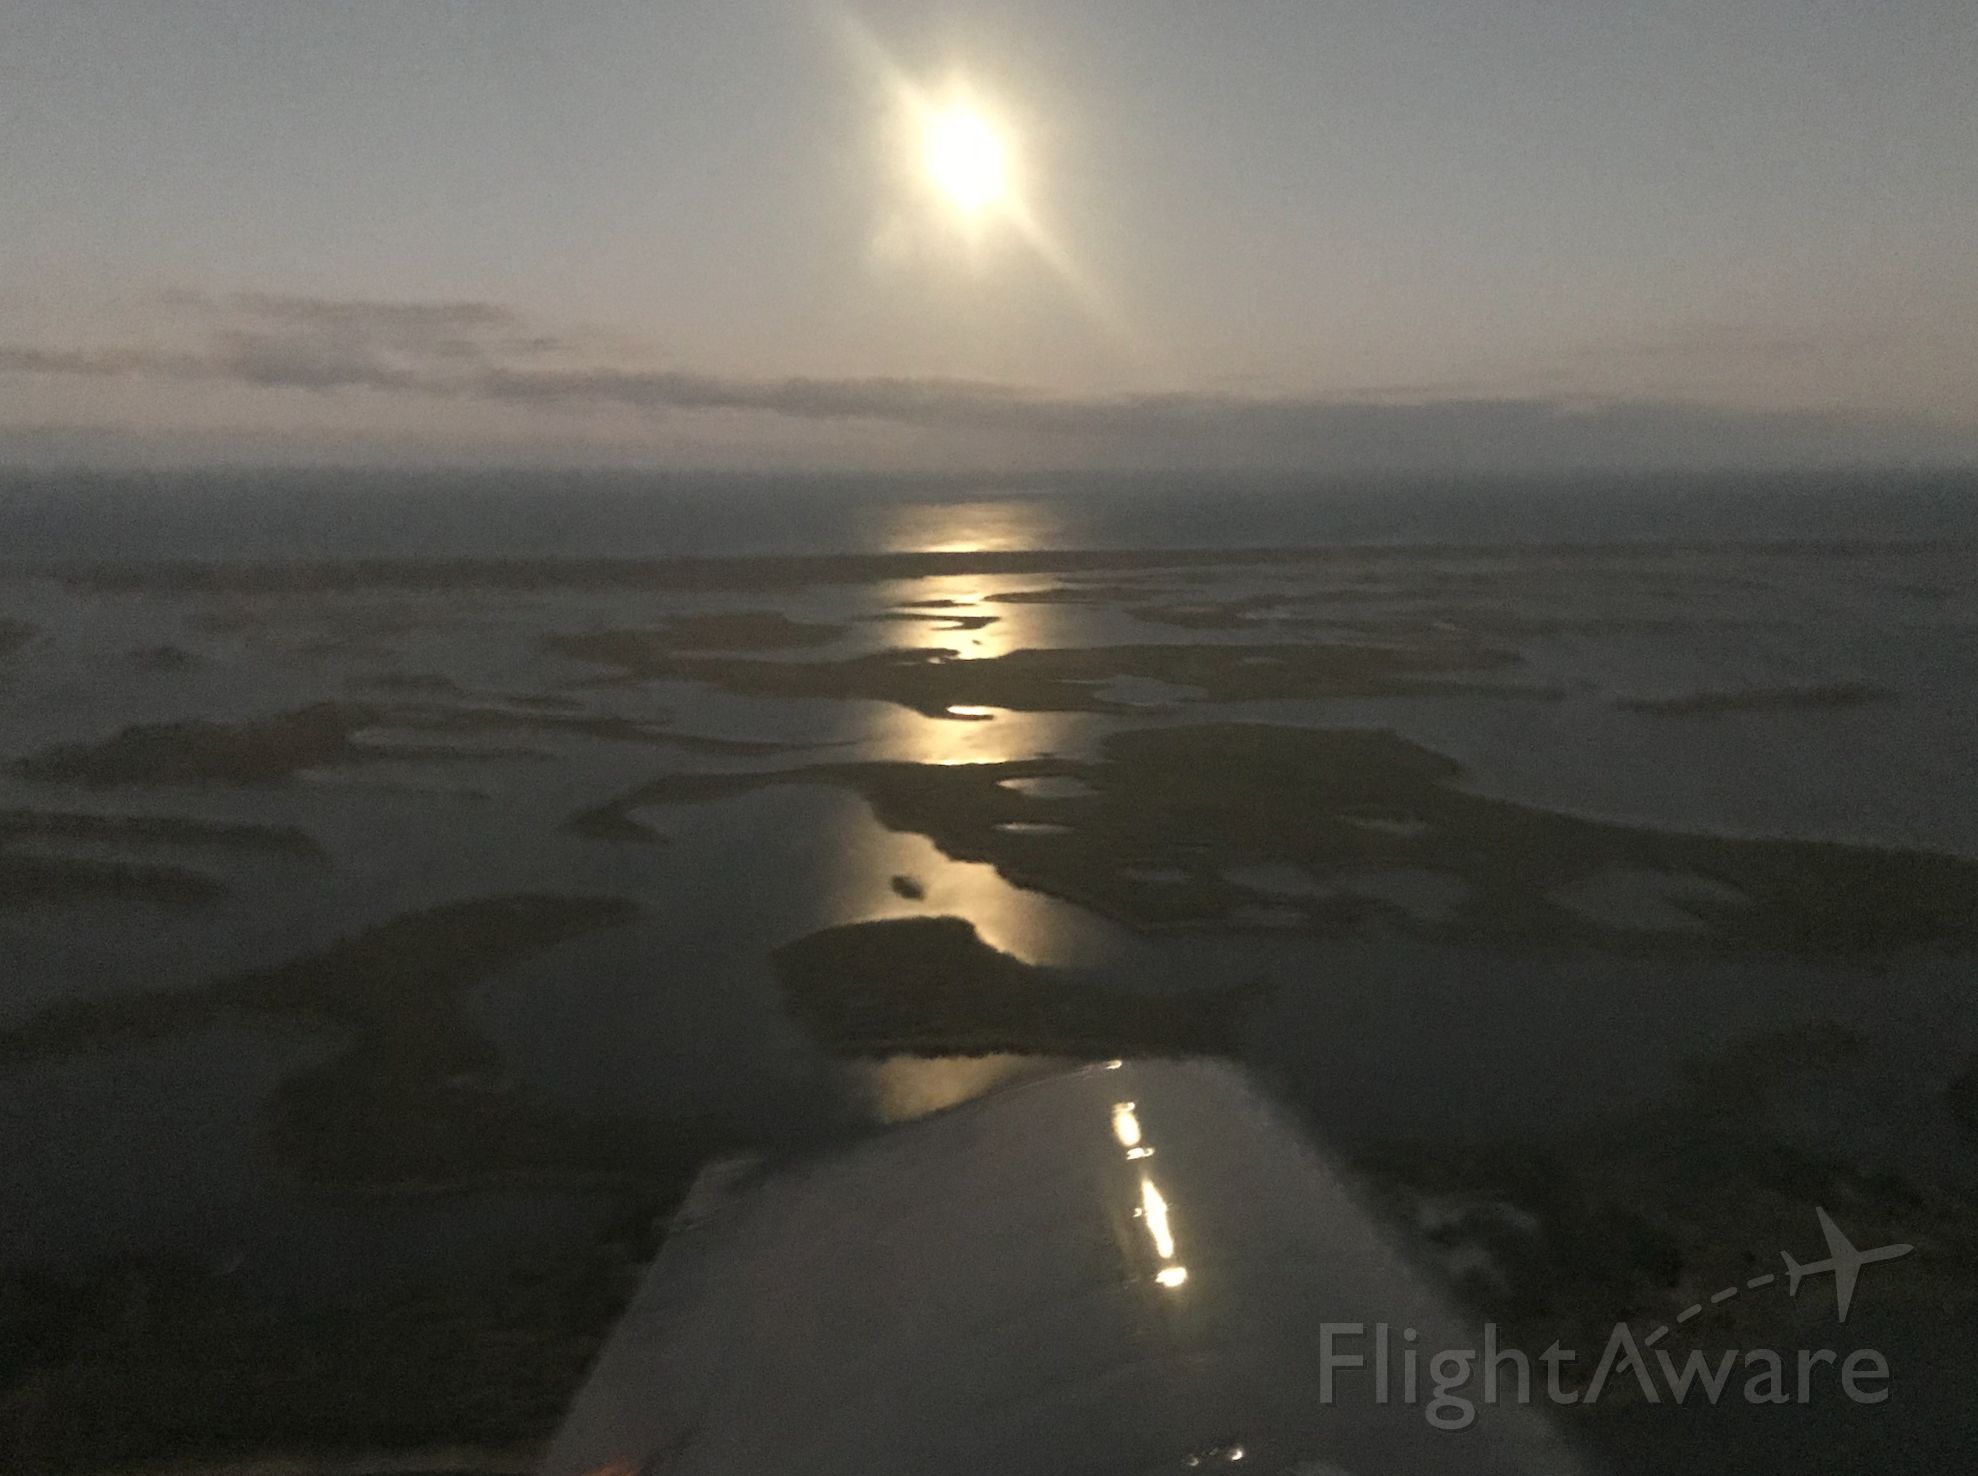 — — - Picture of the super full moon rising this evening over New Smyrna Beach FL from our RV-10.  1/20/19